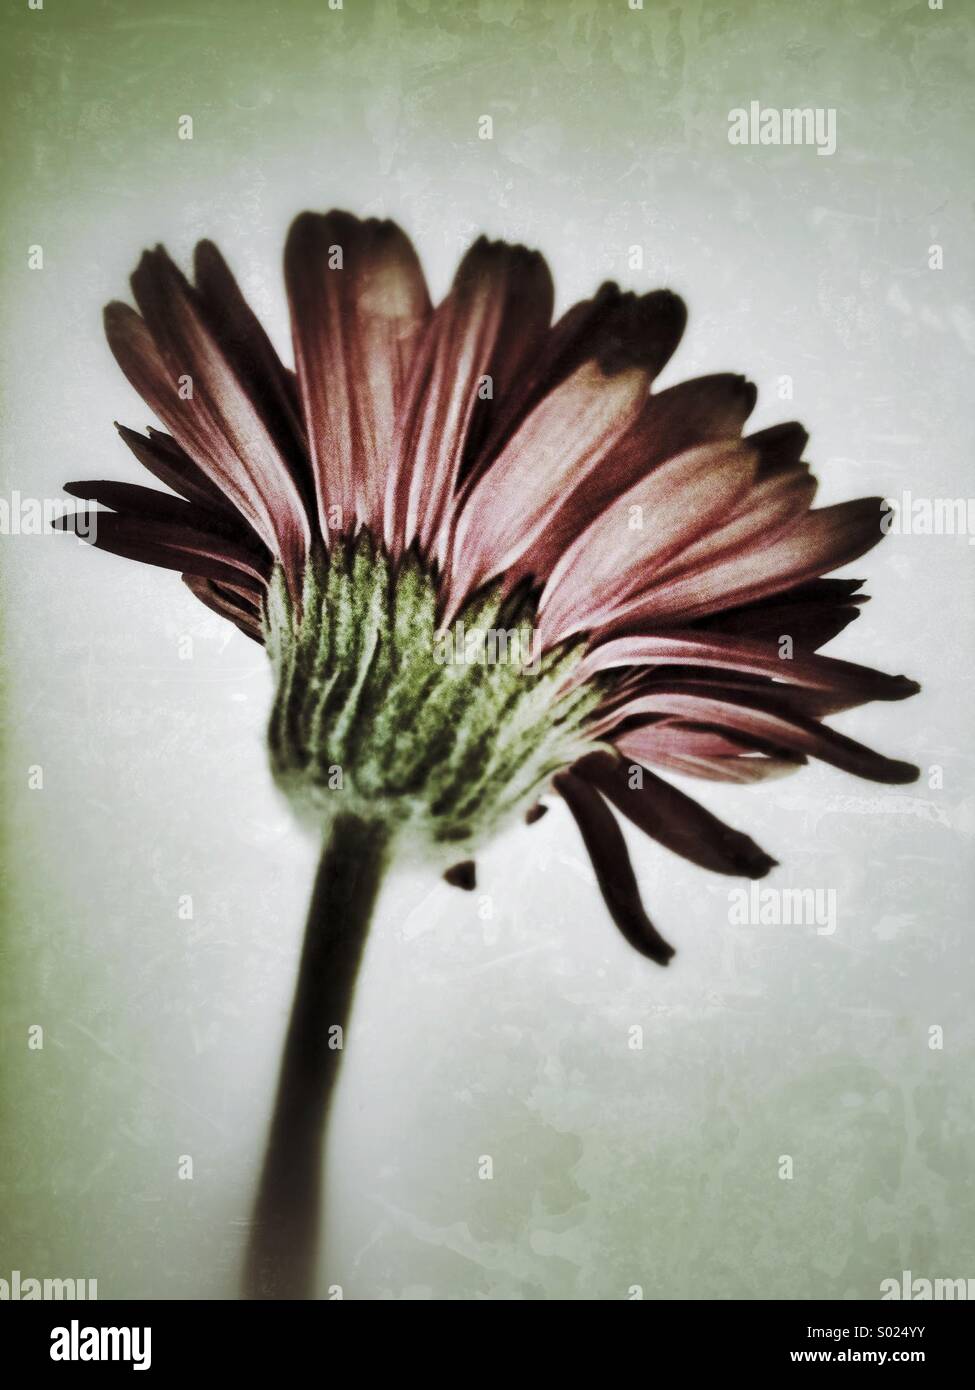 Gerbera flower with grunge effect applied. Stock Photo